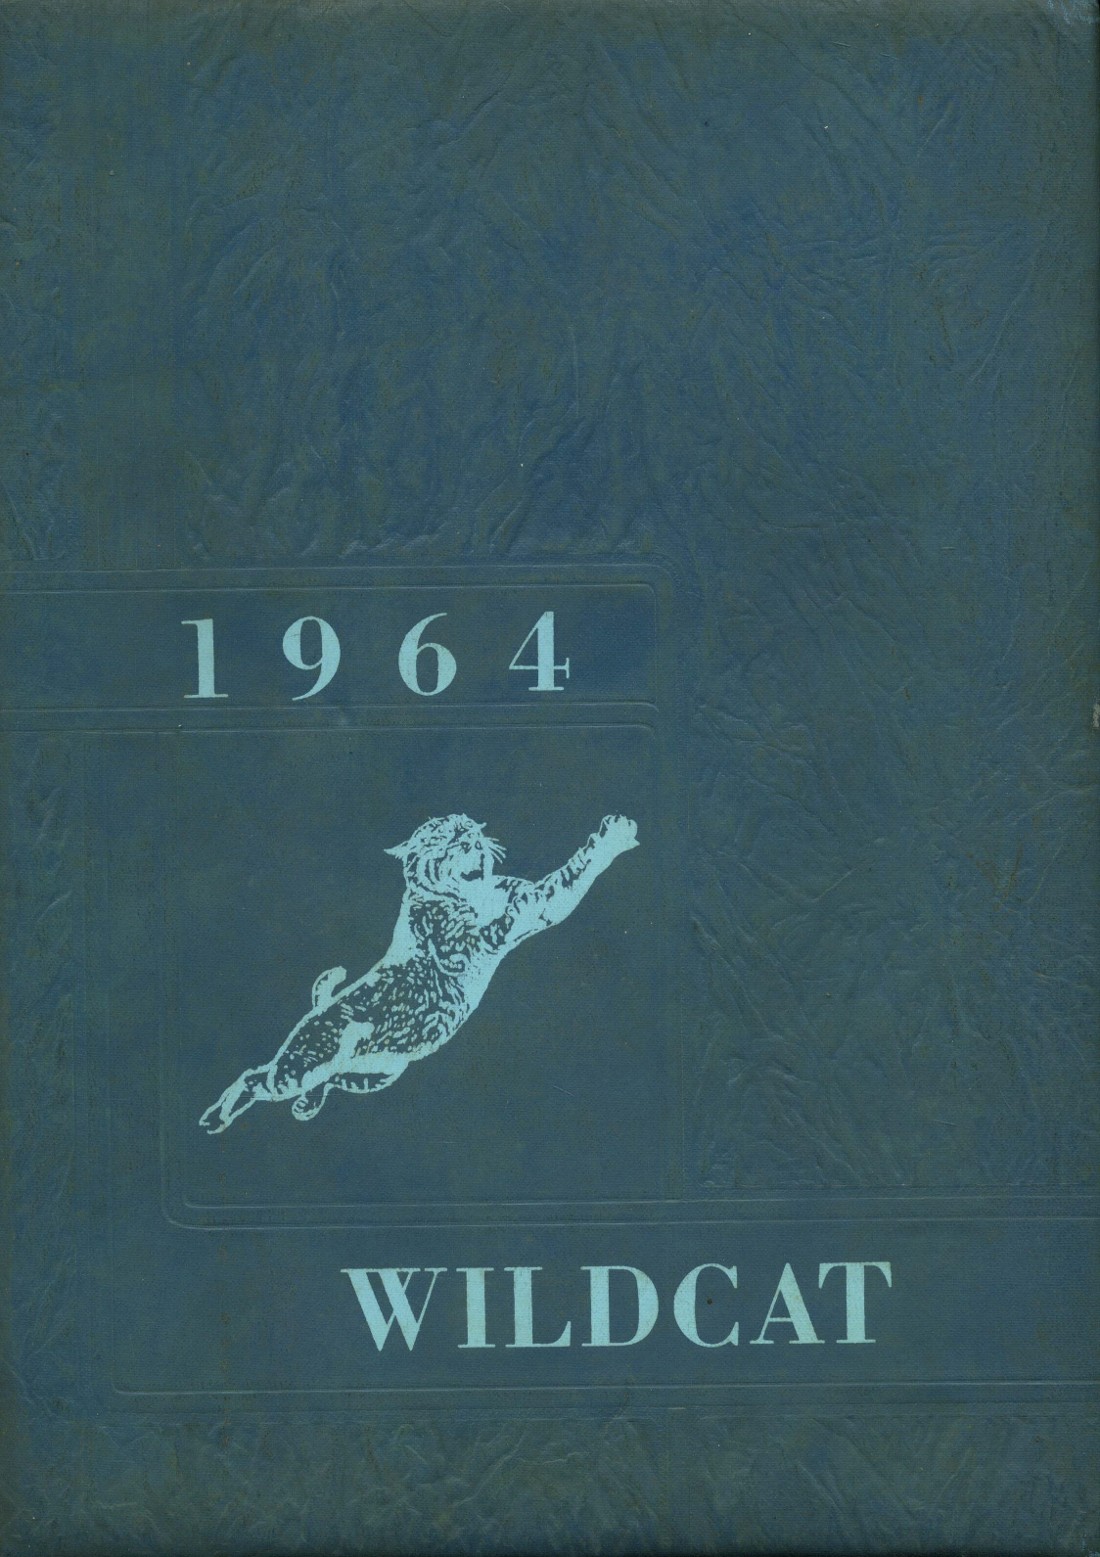 1964 yearbook from Diamond High School from Diamond, Missouri for sale